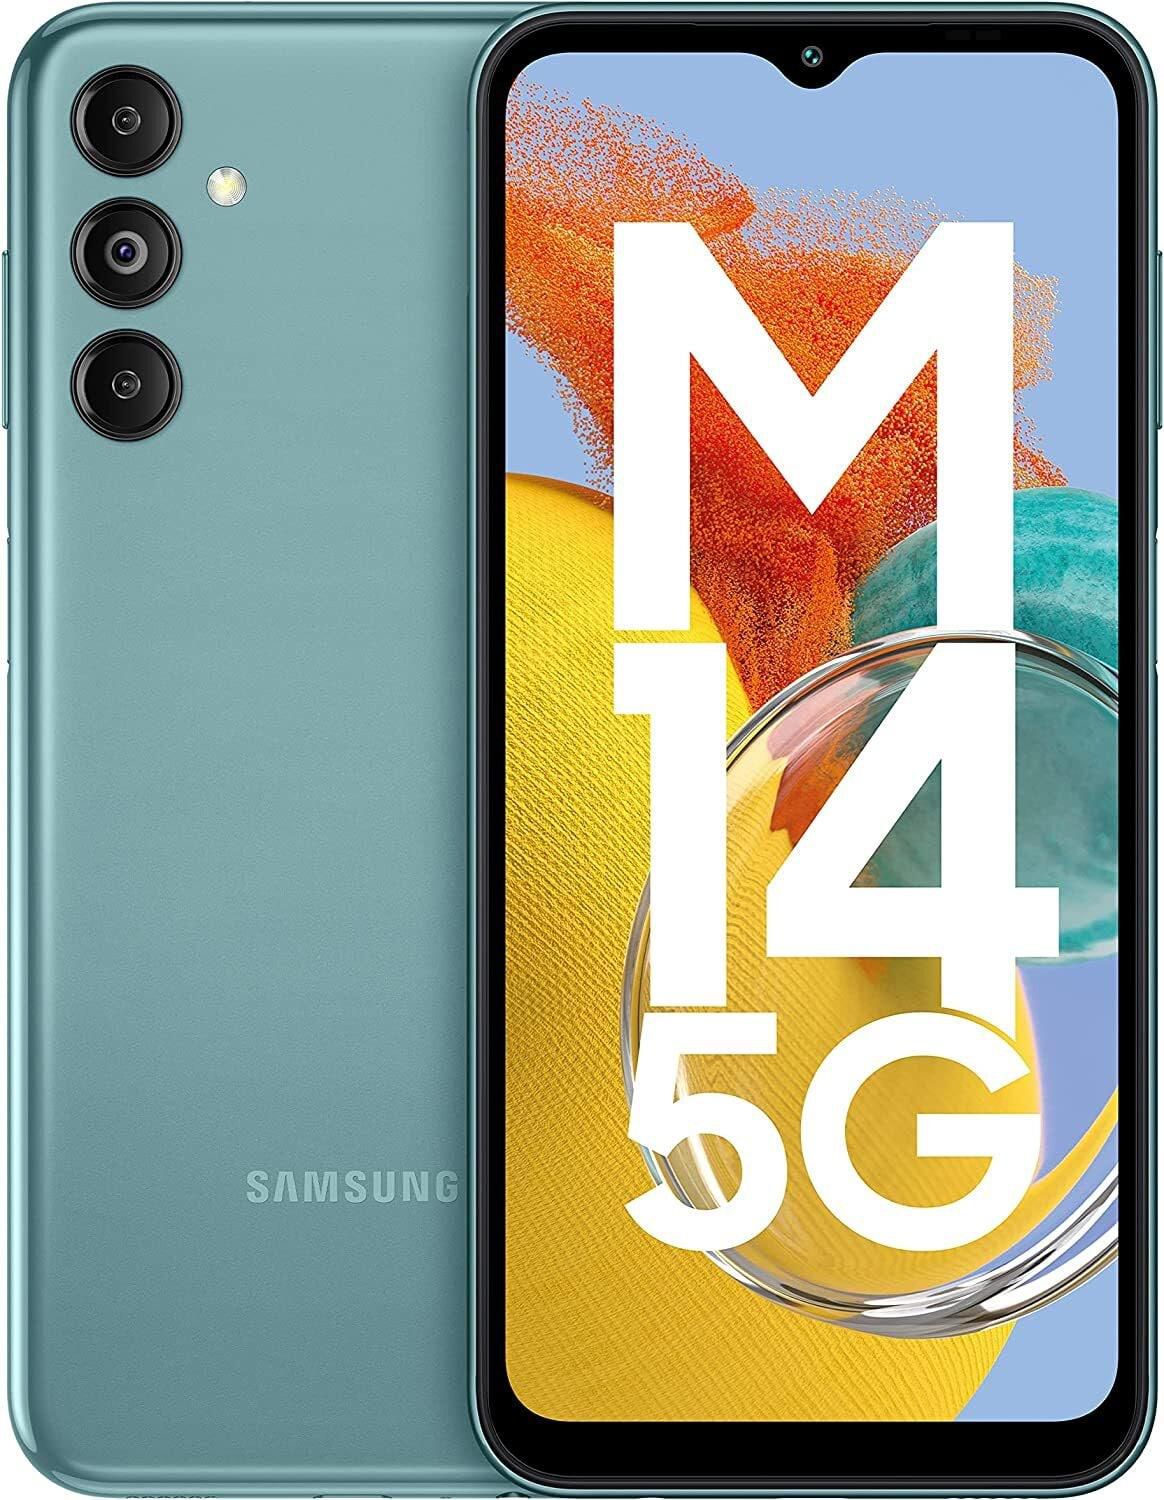 Samsung Galaxy M14, 6GB, 128GB, 5G, Smoky Teal (50MP Triple Cam, 6000mAh Battery, 5nm Octa-Core Processor, 12GB RAM With RAM Plus, Android 13, Without Charger)